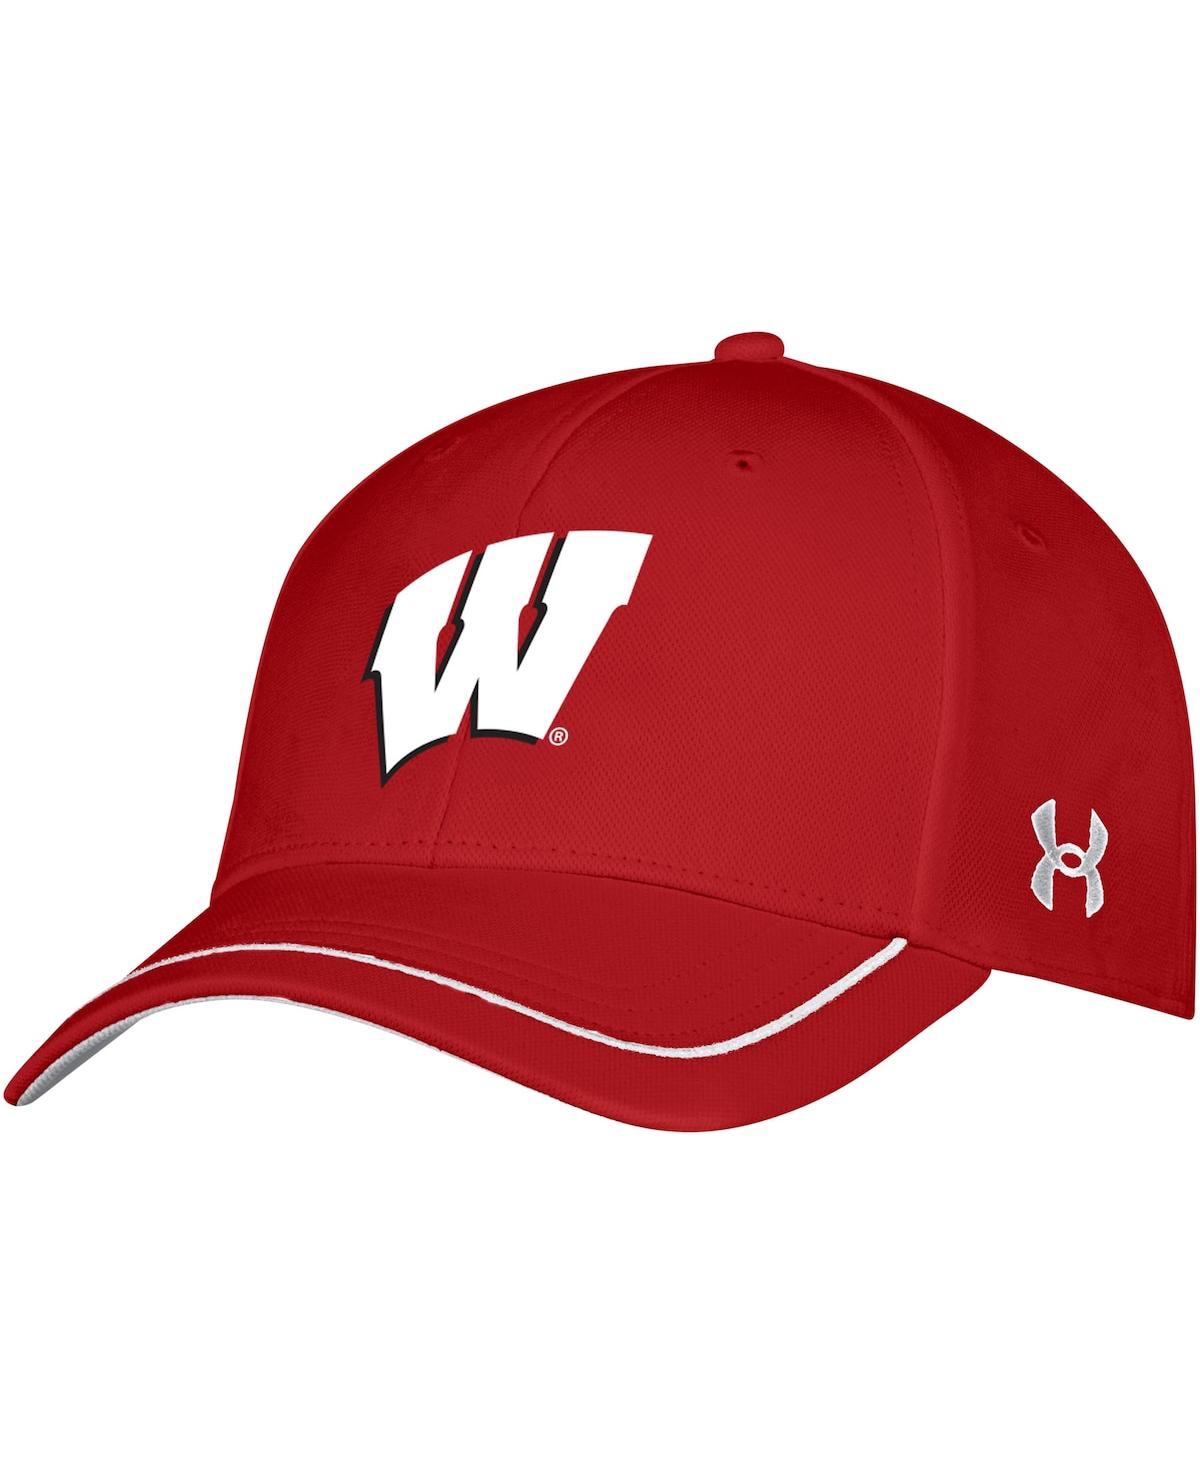 Under Armour Kids' Youth Boys And Girls  Red Wisconsin Badgers Blitzing Accent Performance Adjustable Hat